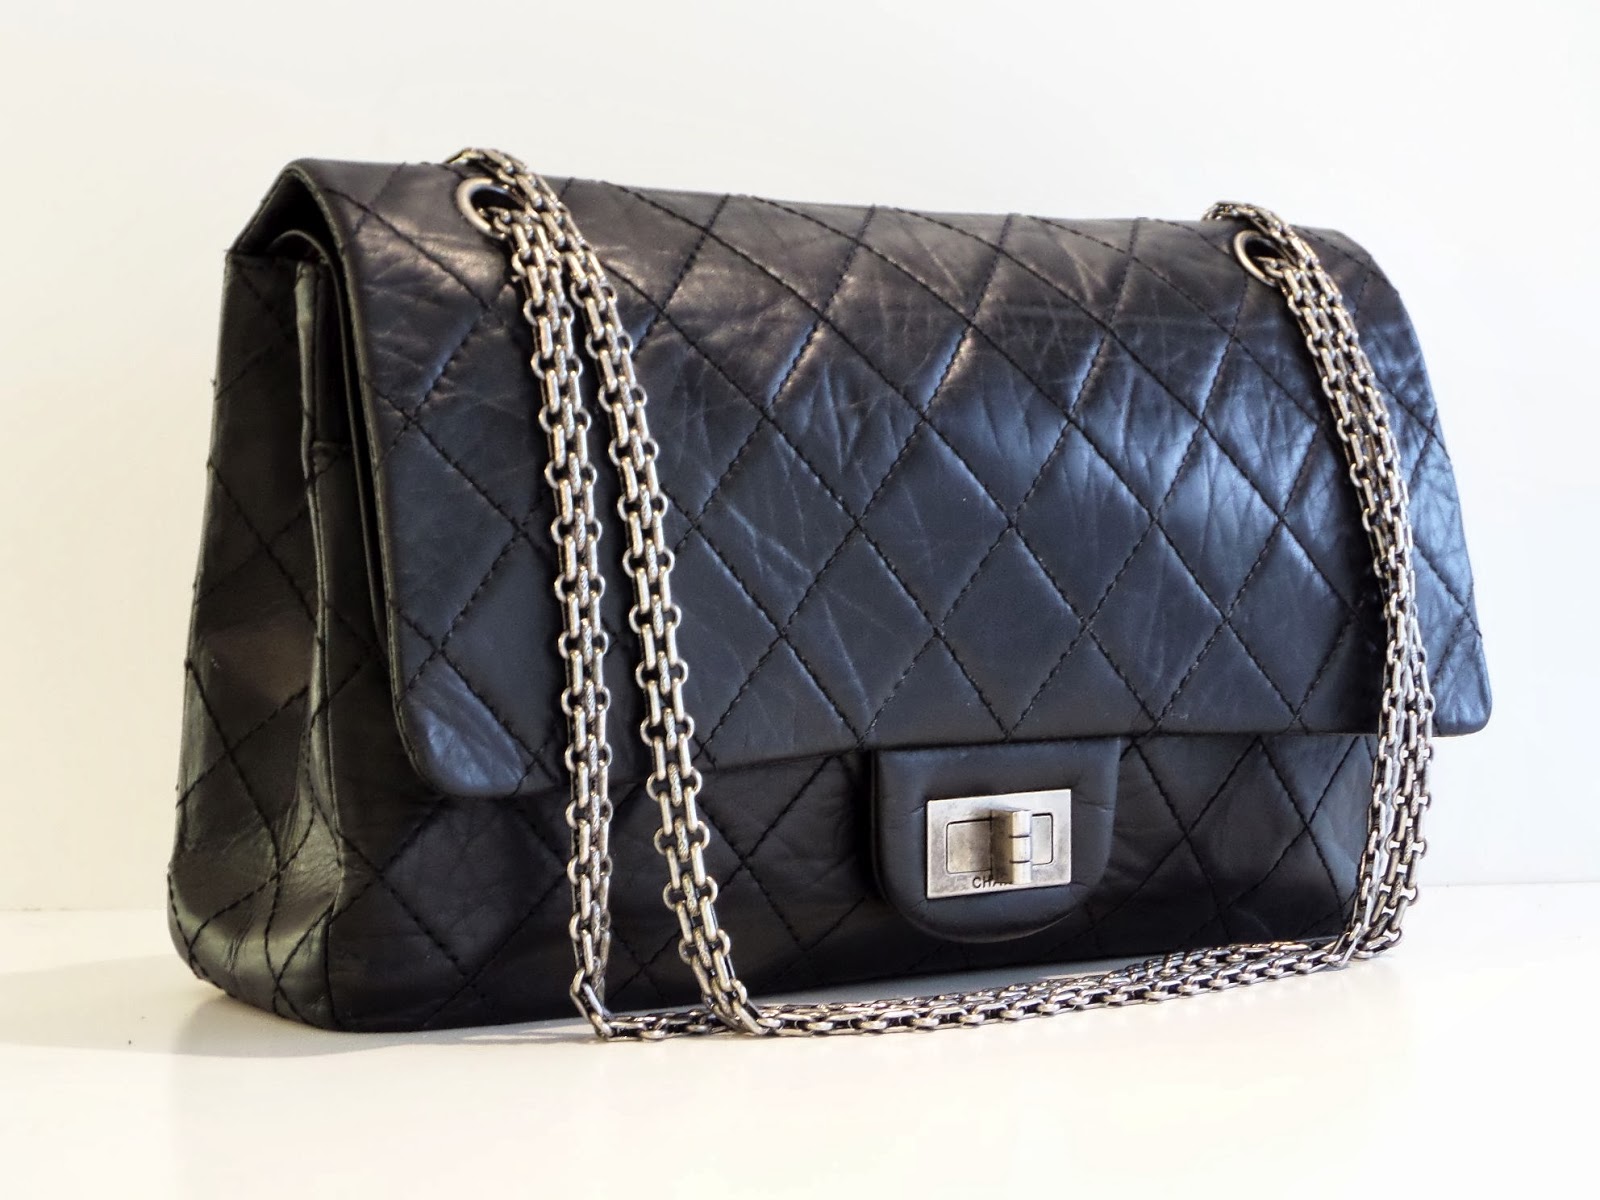 Chanel Black 2.55 Reissue Quilted Classic Leather 227 Jumbo Flap Bag